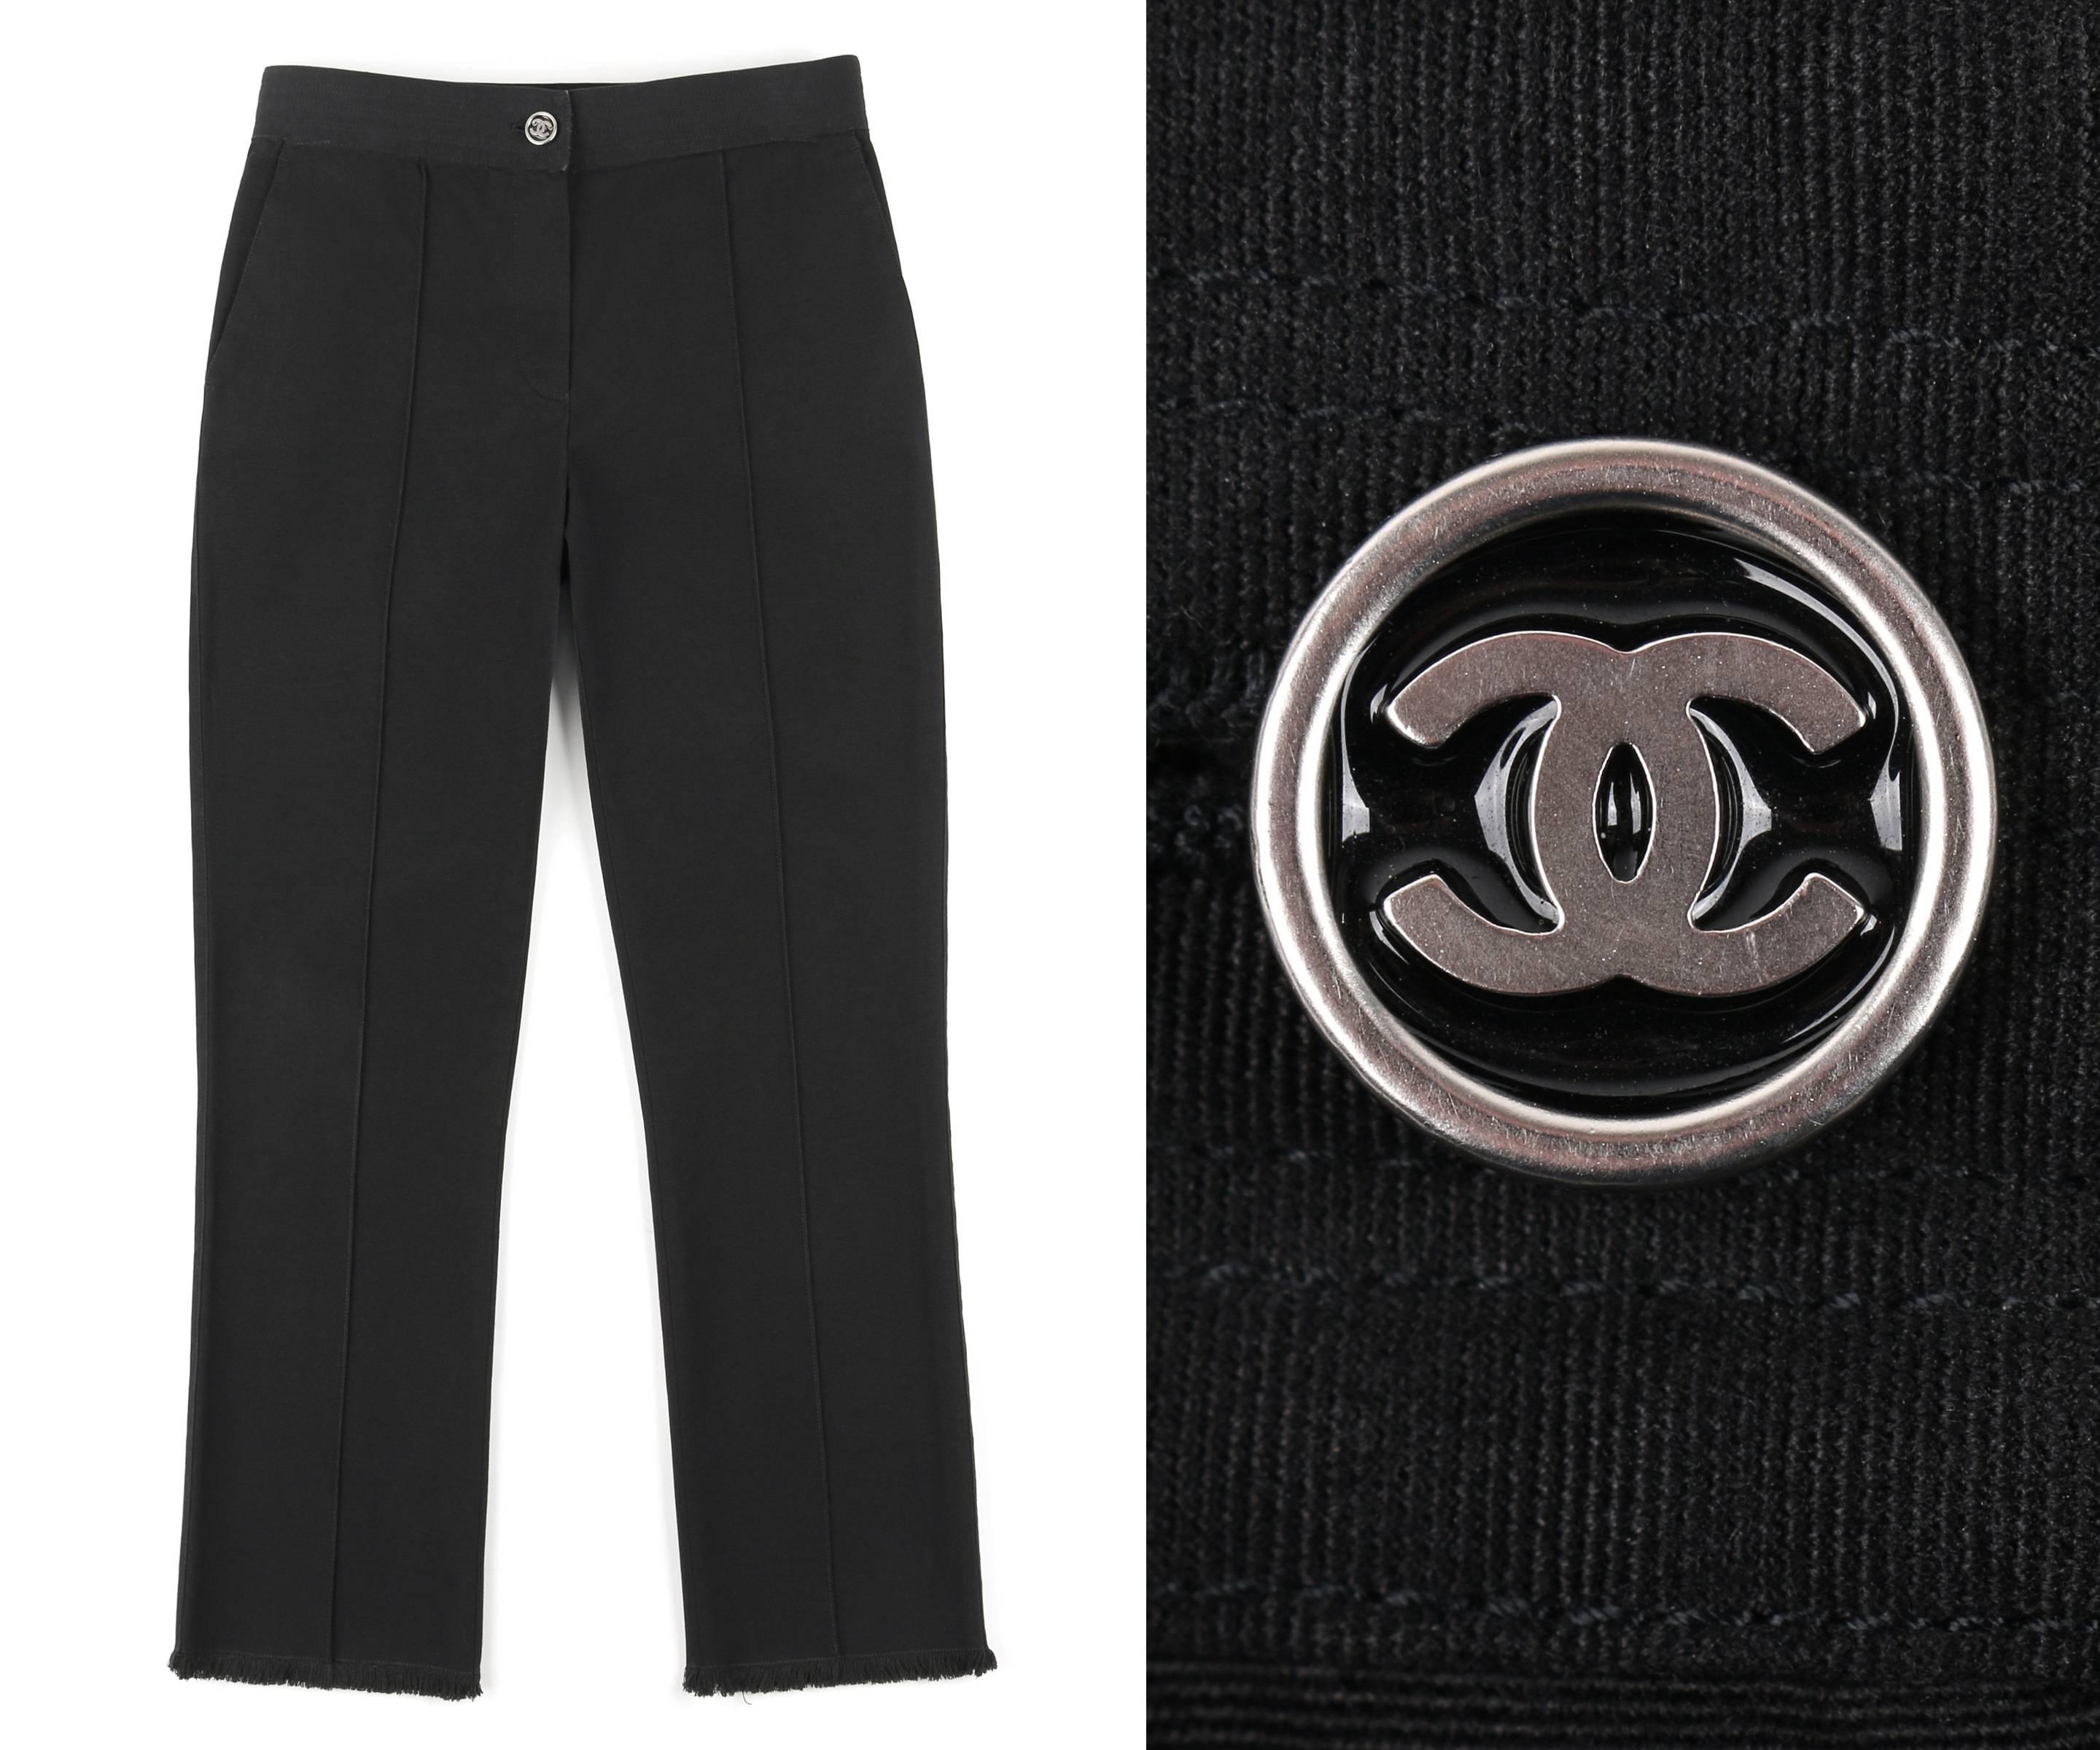 Chanel S/S 2004 black cotton stretch gaberdine capri / ankle length pants. Straight cut. Center front zip fly with silver and black 